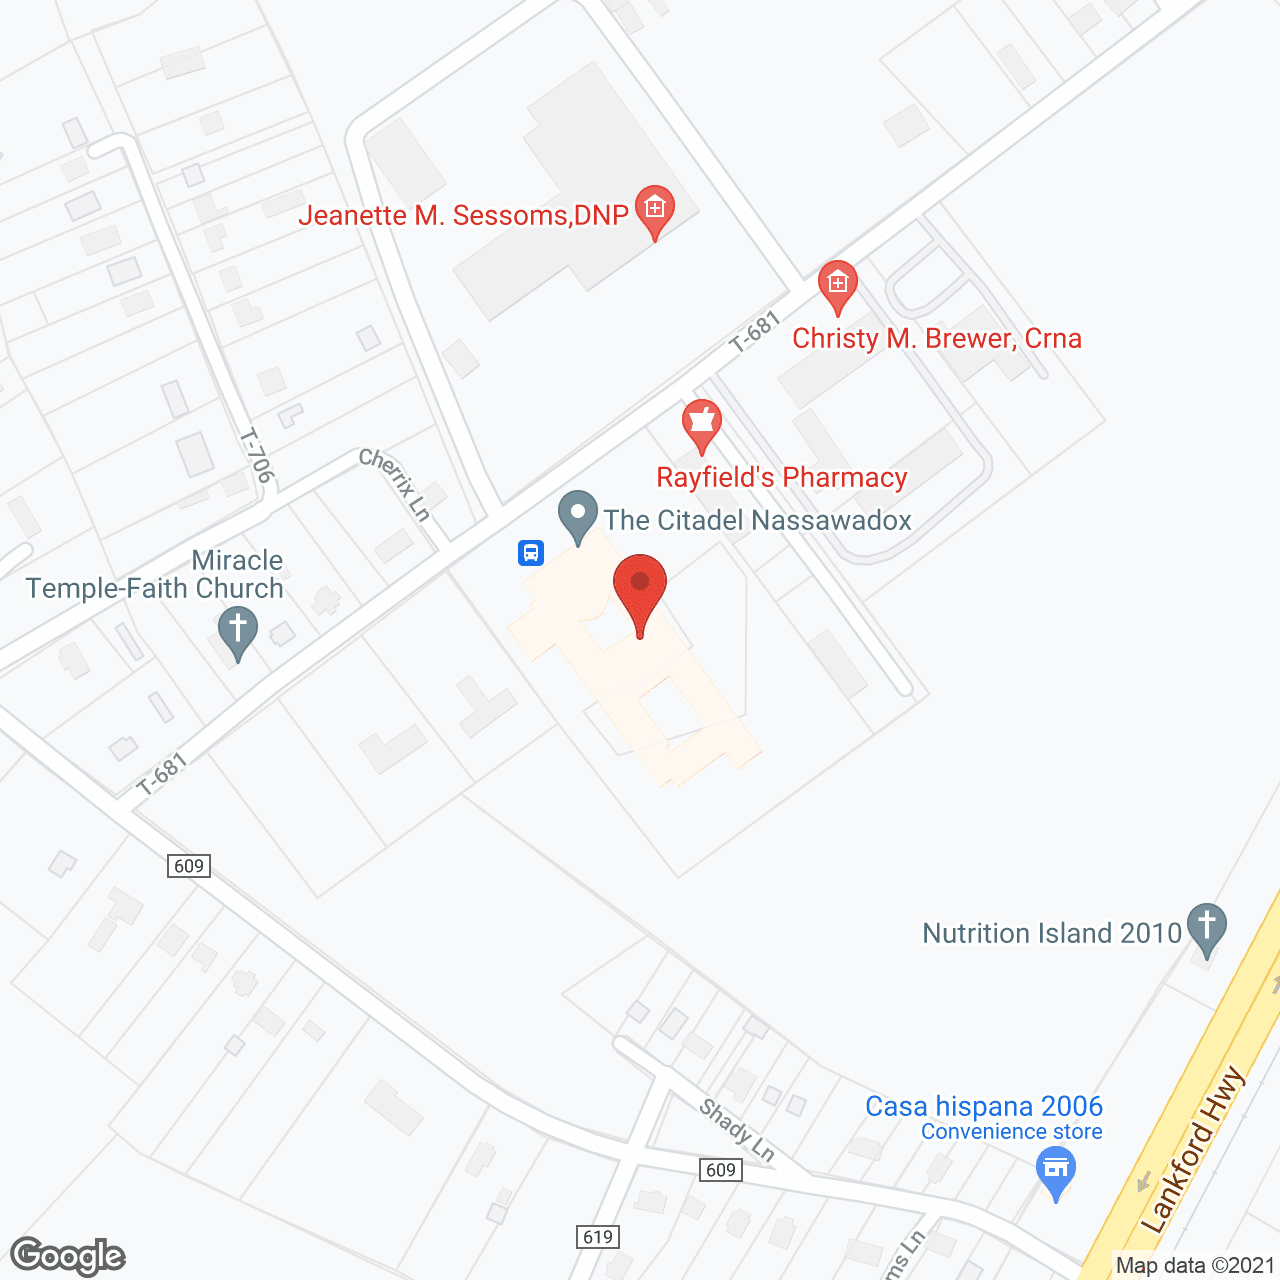 Heritage Hall in google map